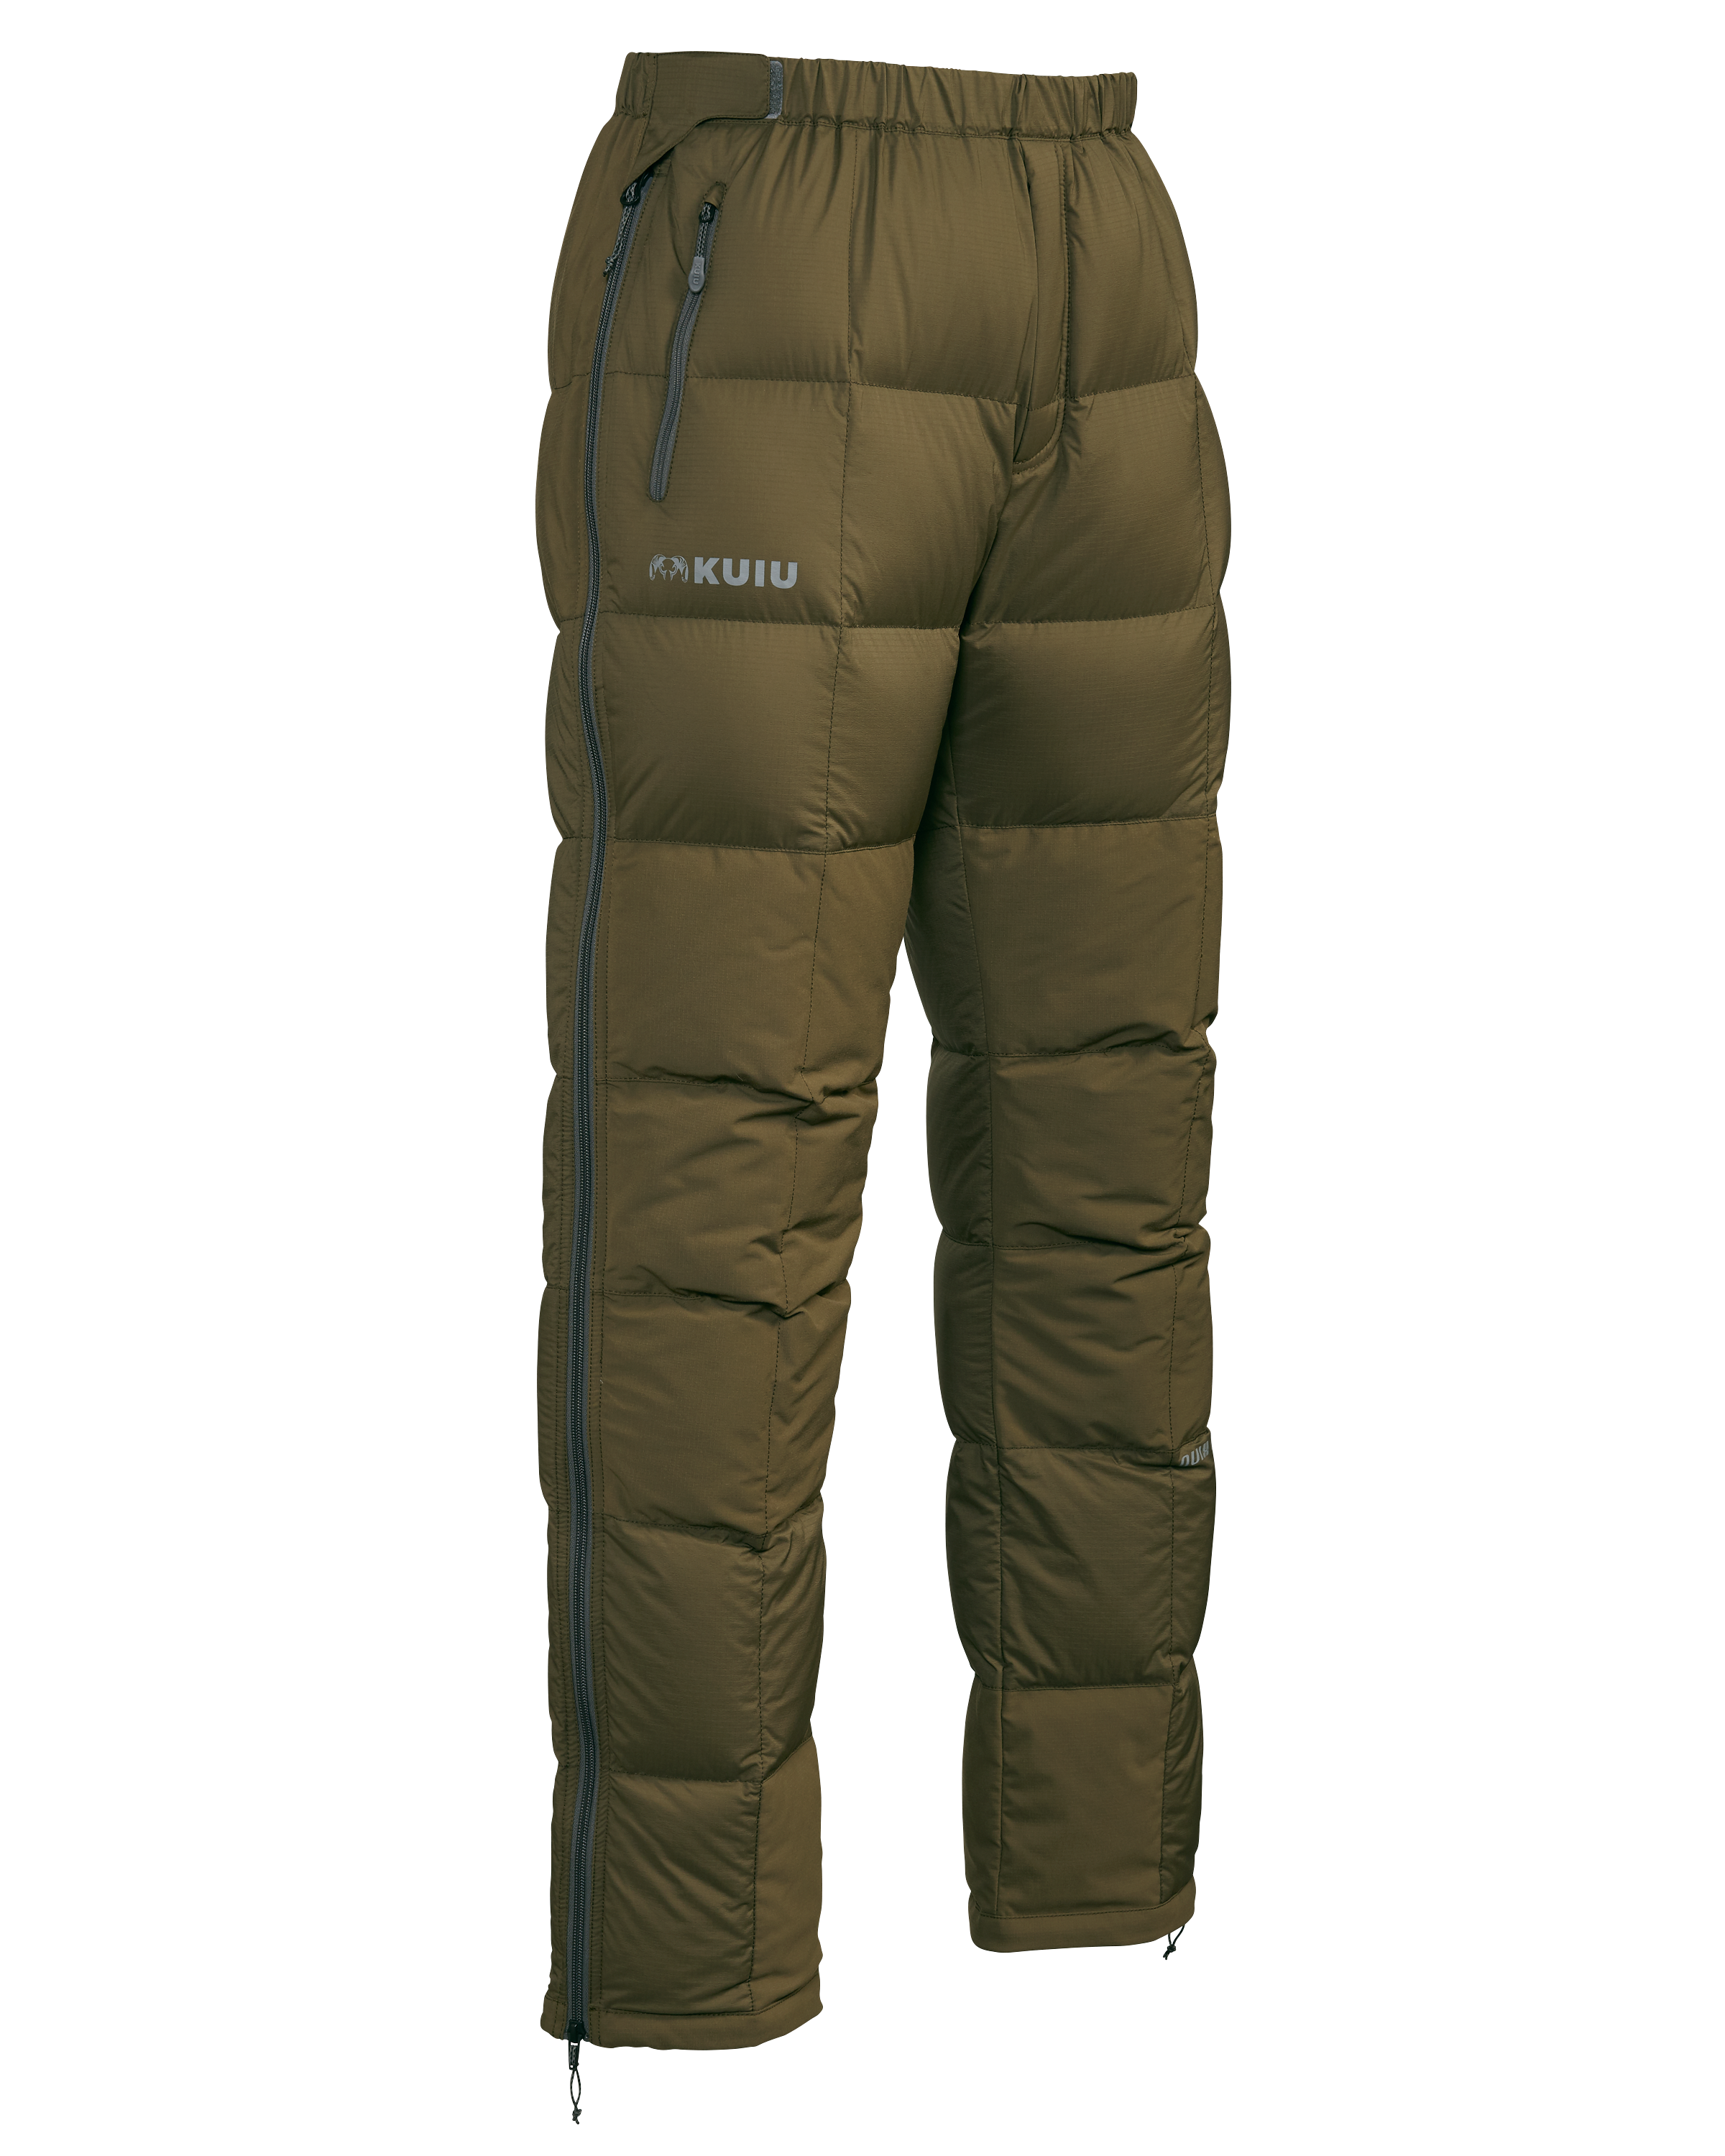 KUIU Super Down PRO Hunting Pant in Bourbon | Size 3XL